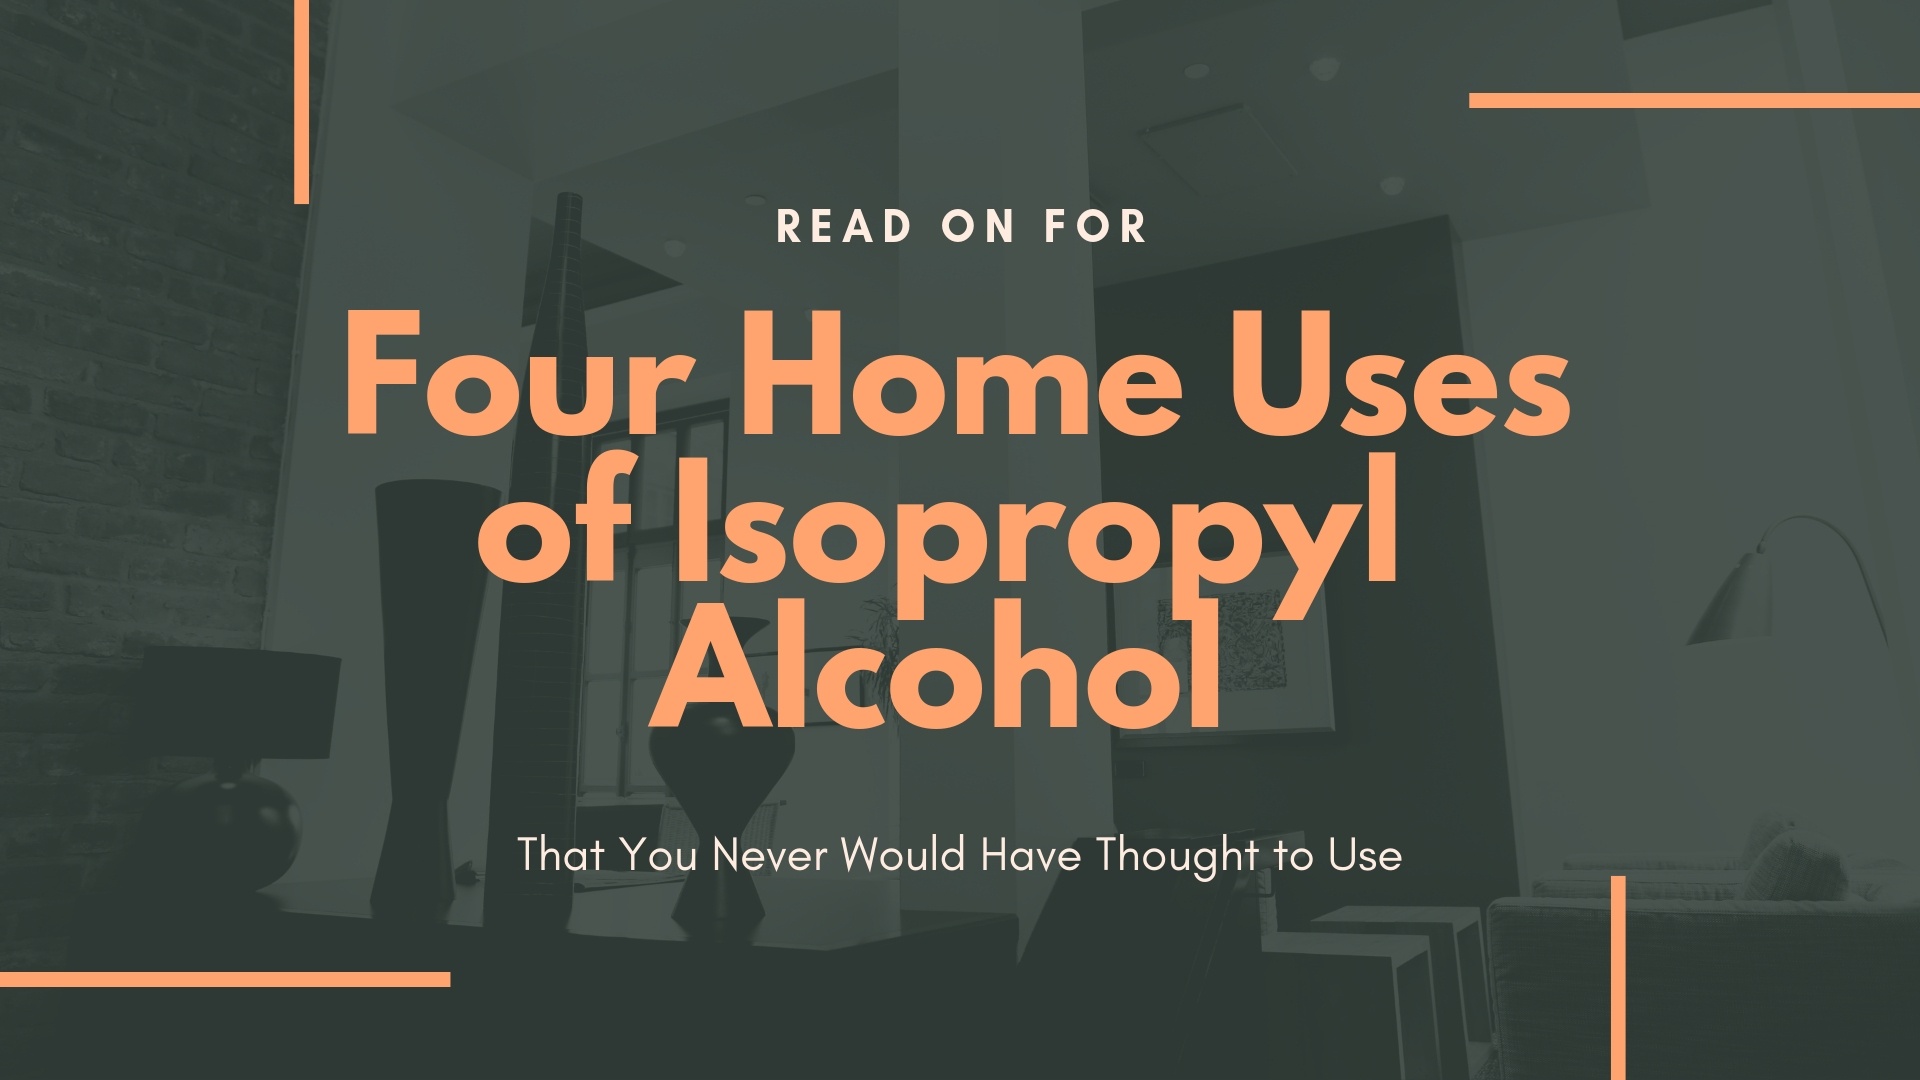 Read on to learn four home uses of isopropyl alcohol 99% that you never would have thought to use.